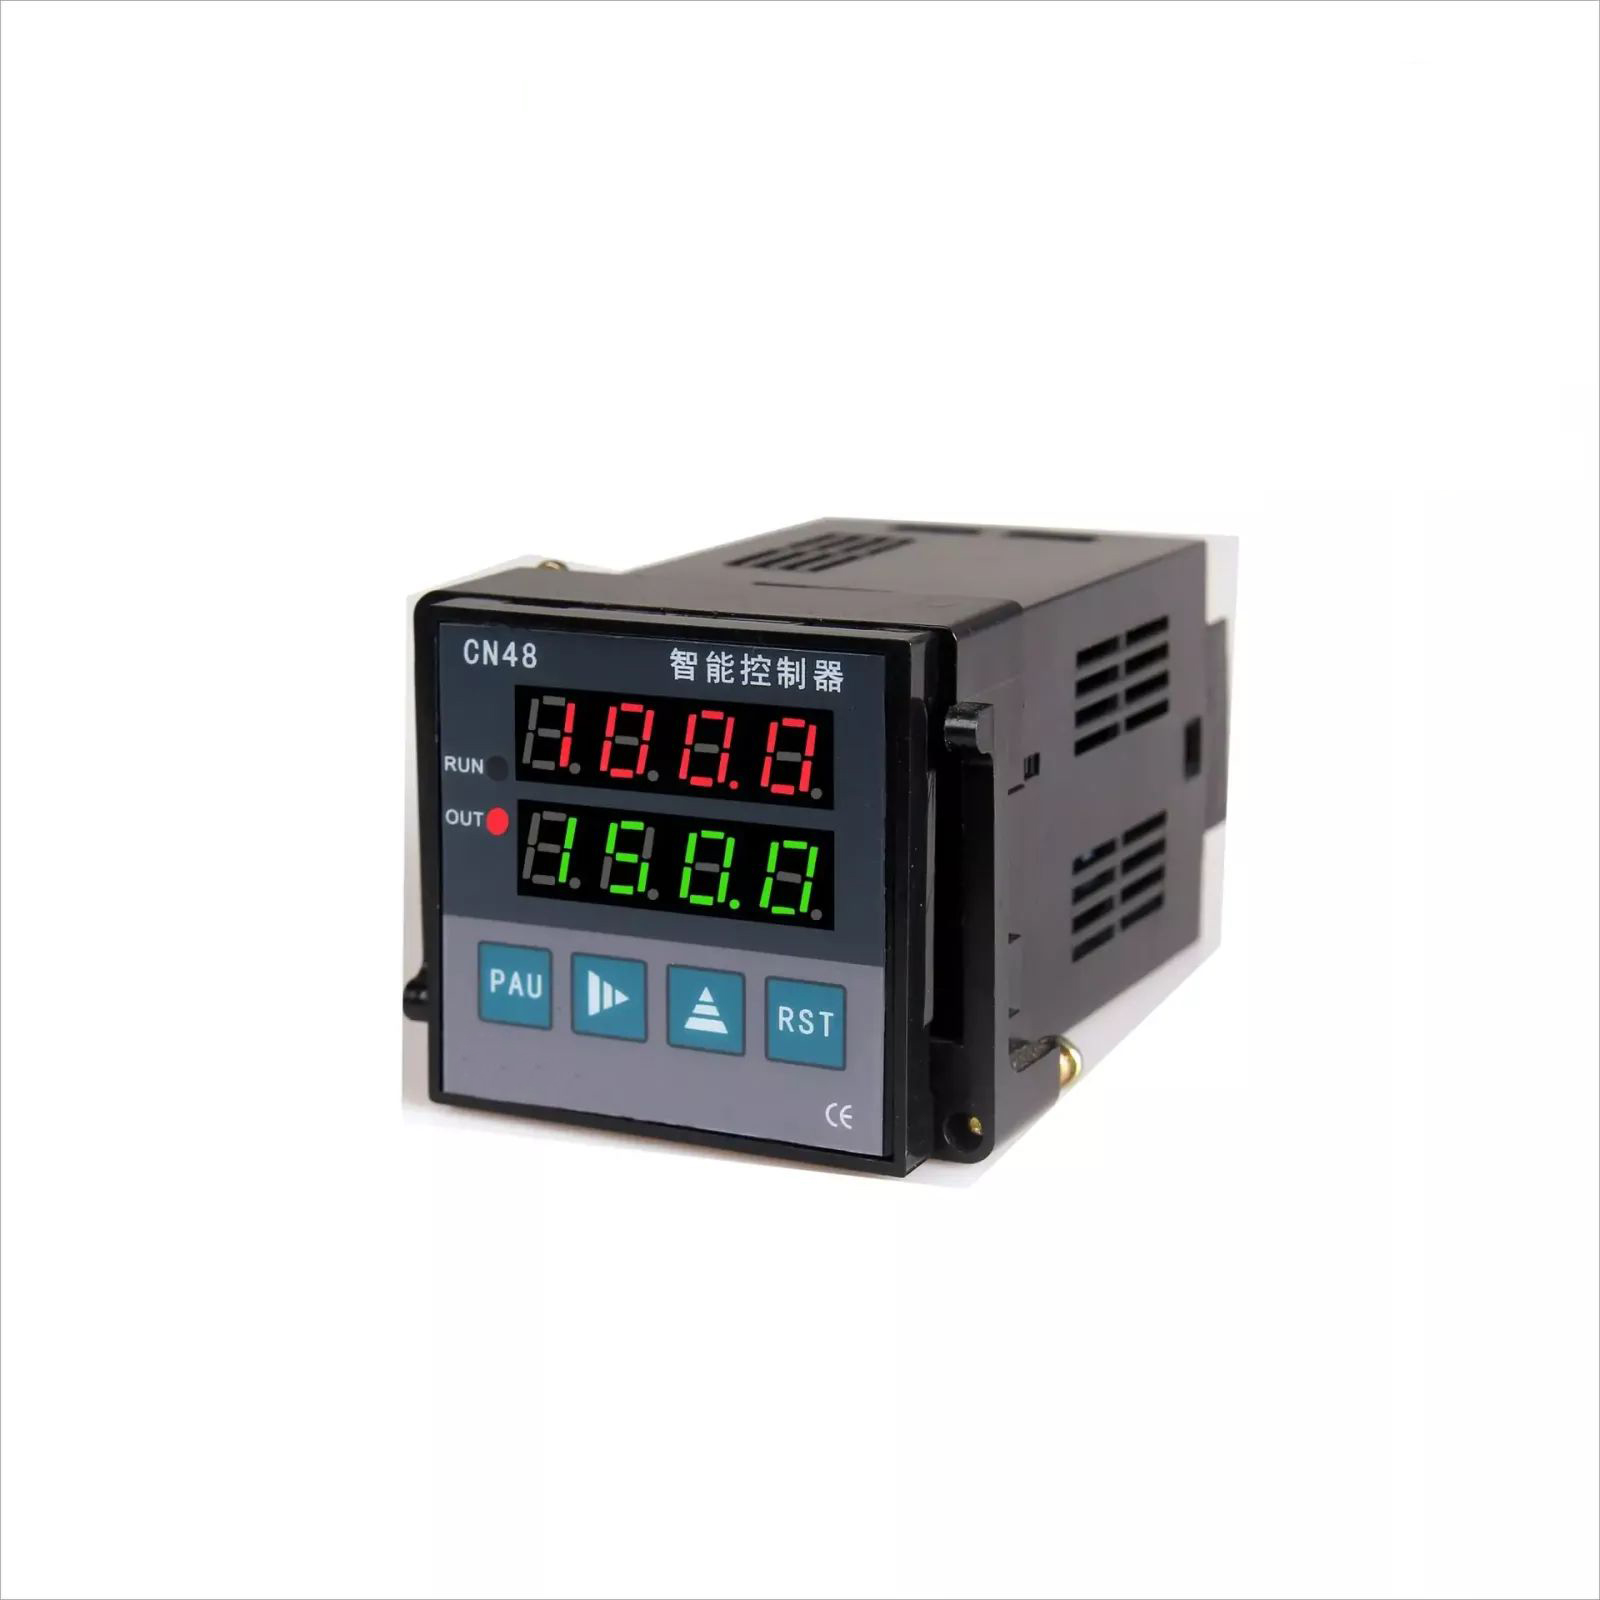 48*48MM digital Relay output multi-functional optional meter with Frequency and Revolution functions